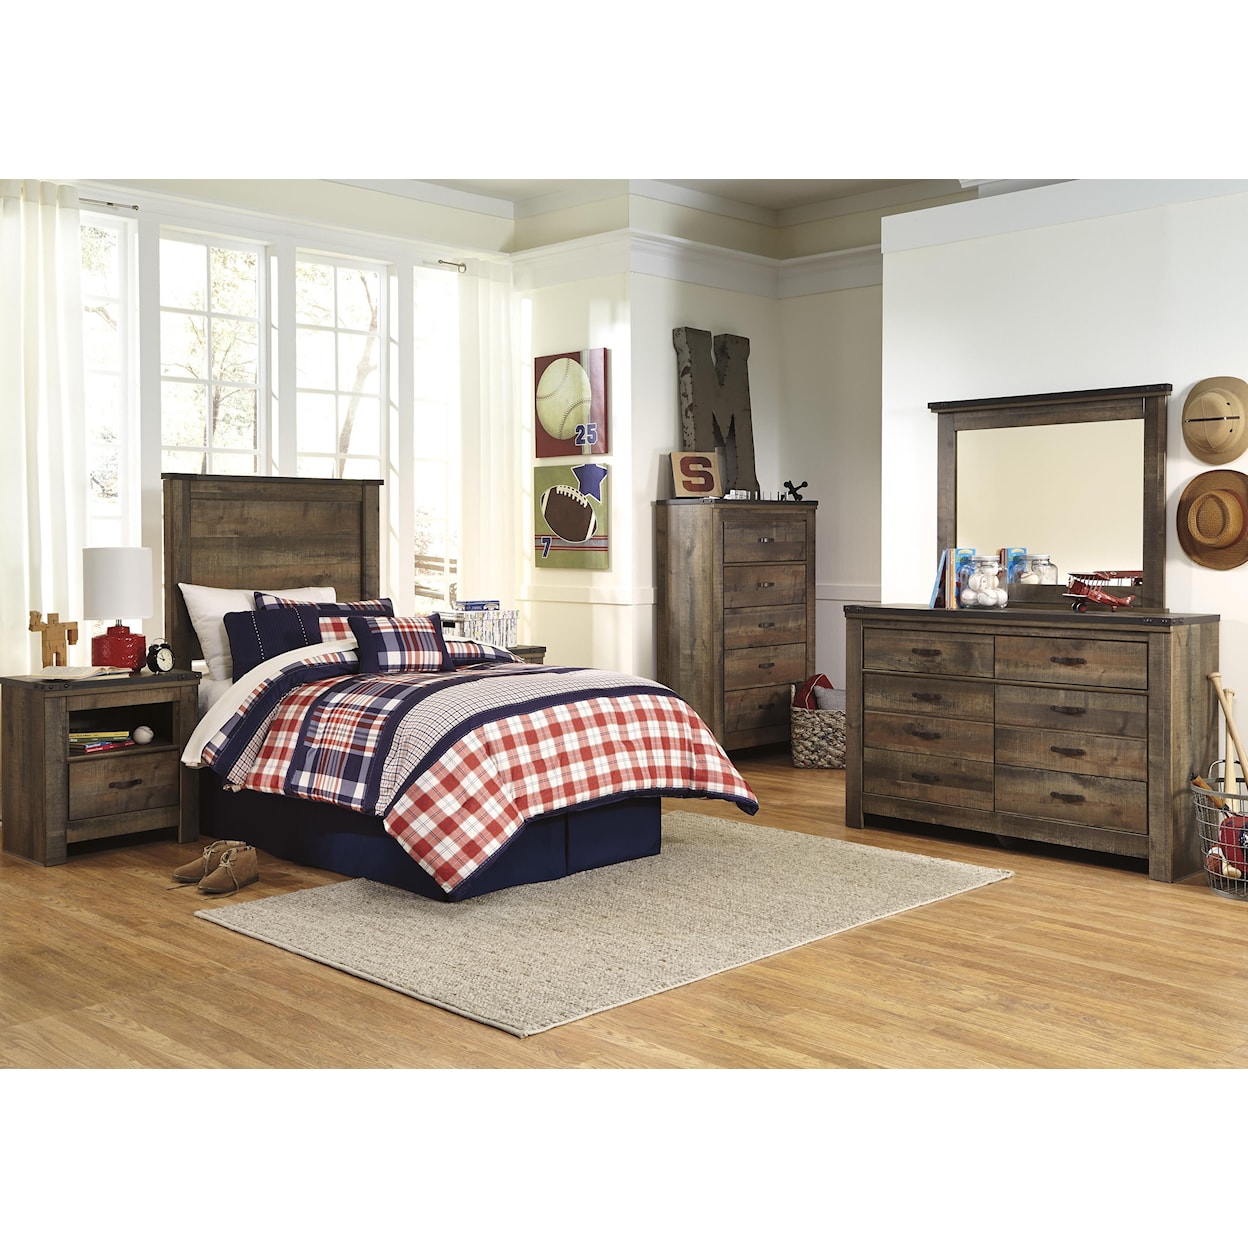 Signature Design by Ashley Trinell 5pc Twin Bedroom Group